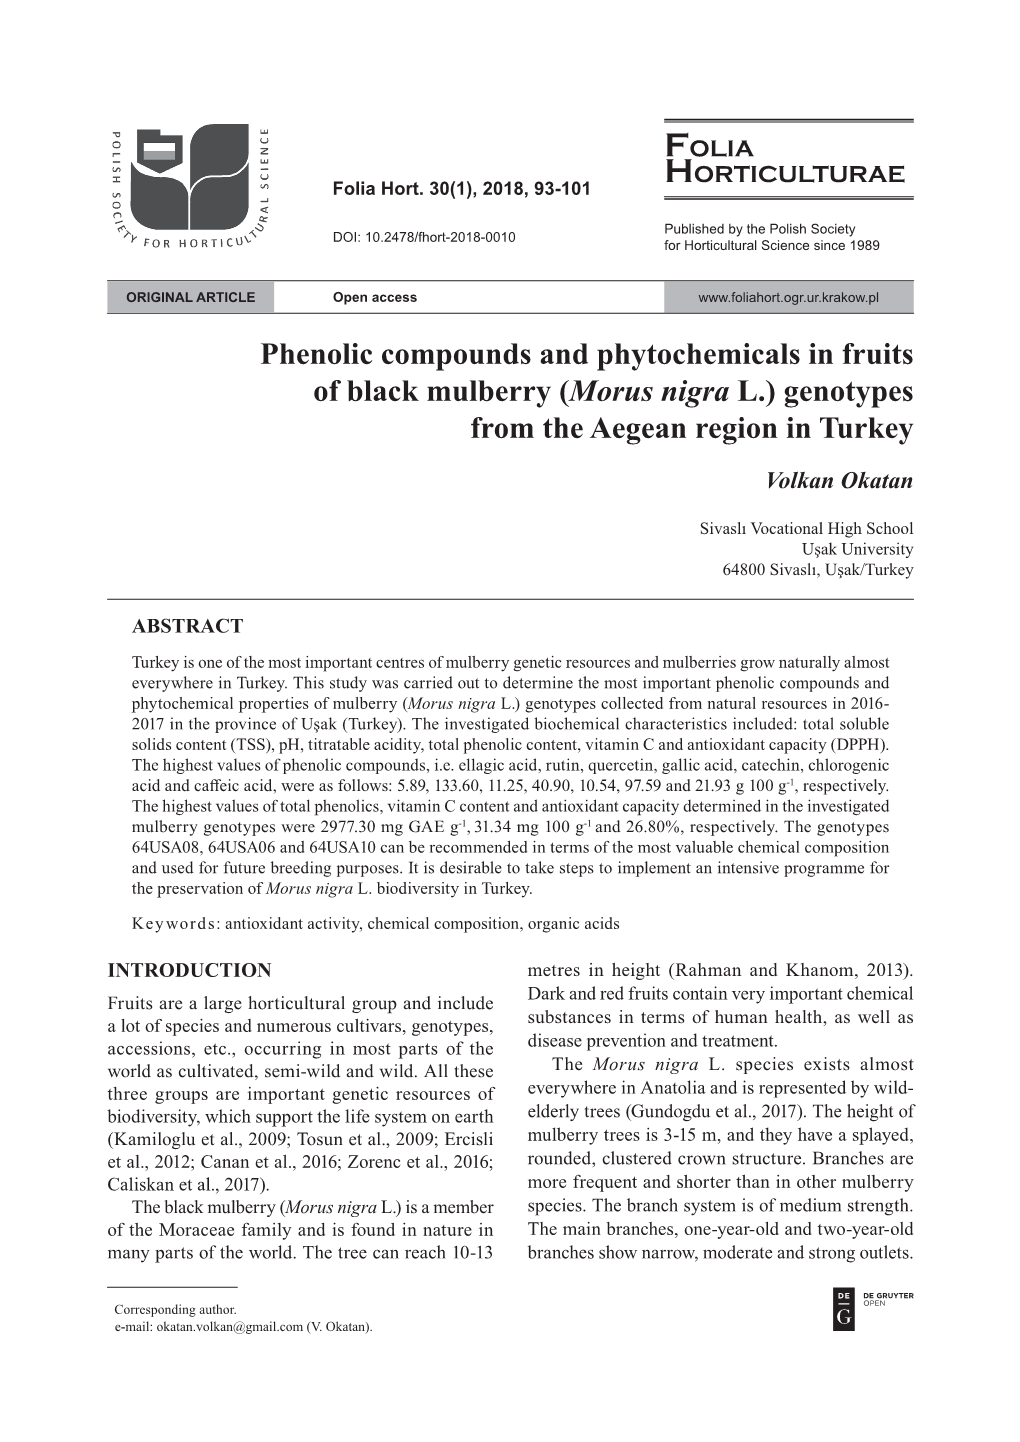 Phenolic Compounds and Phytochemicals in Fruits of Black Mulberry (Morus Nigra L.) Genotypes from the Aegean Region in Turkey Volkan Okatan